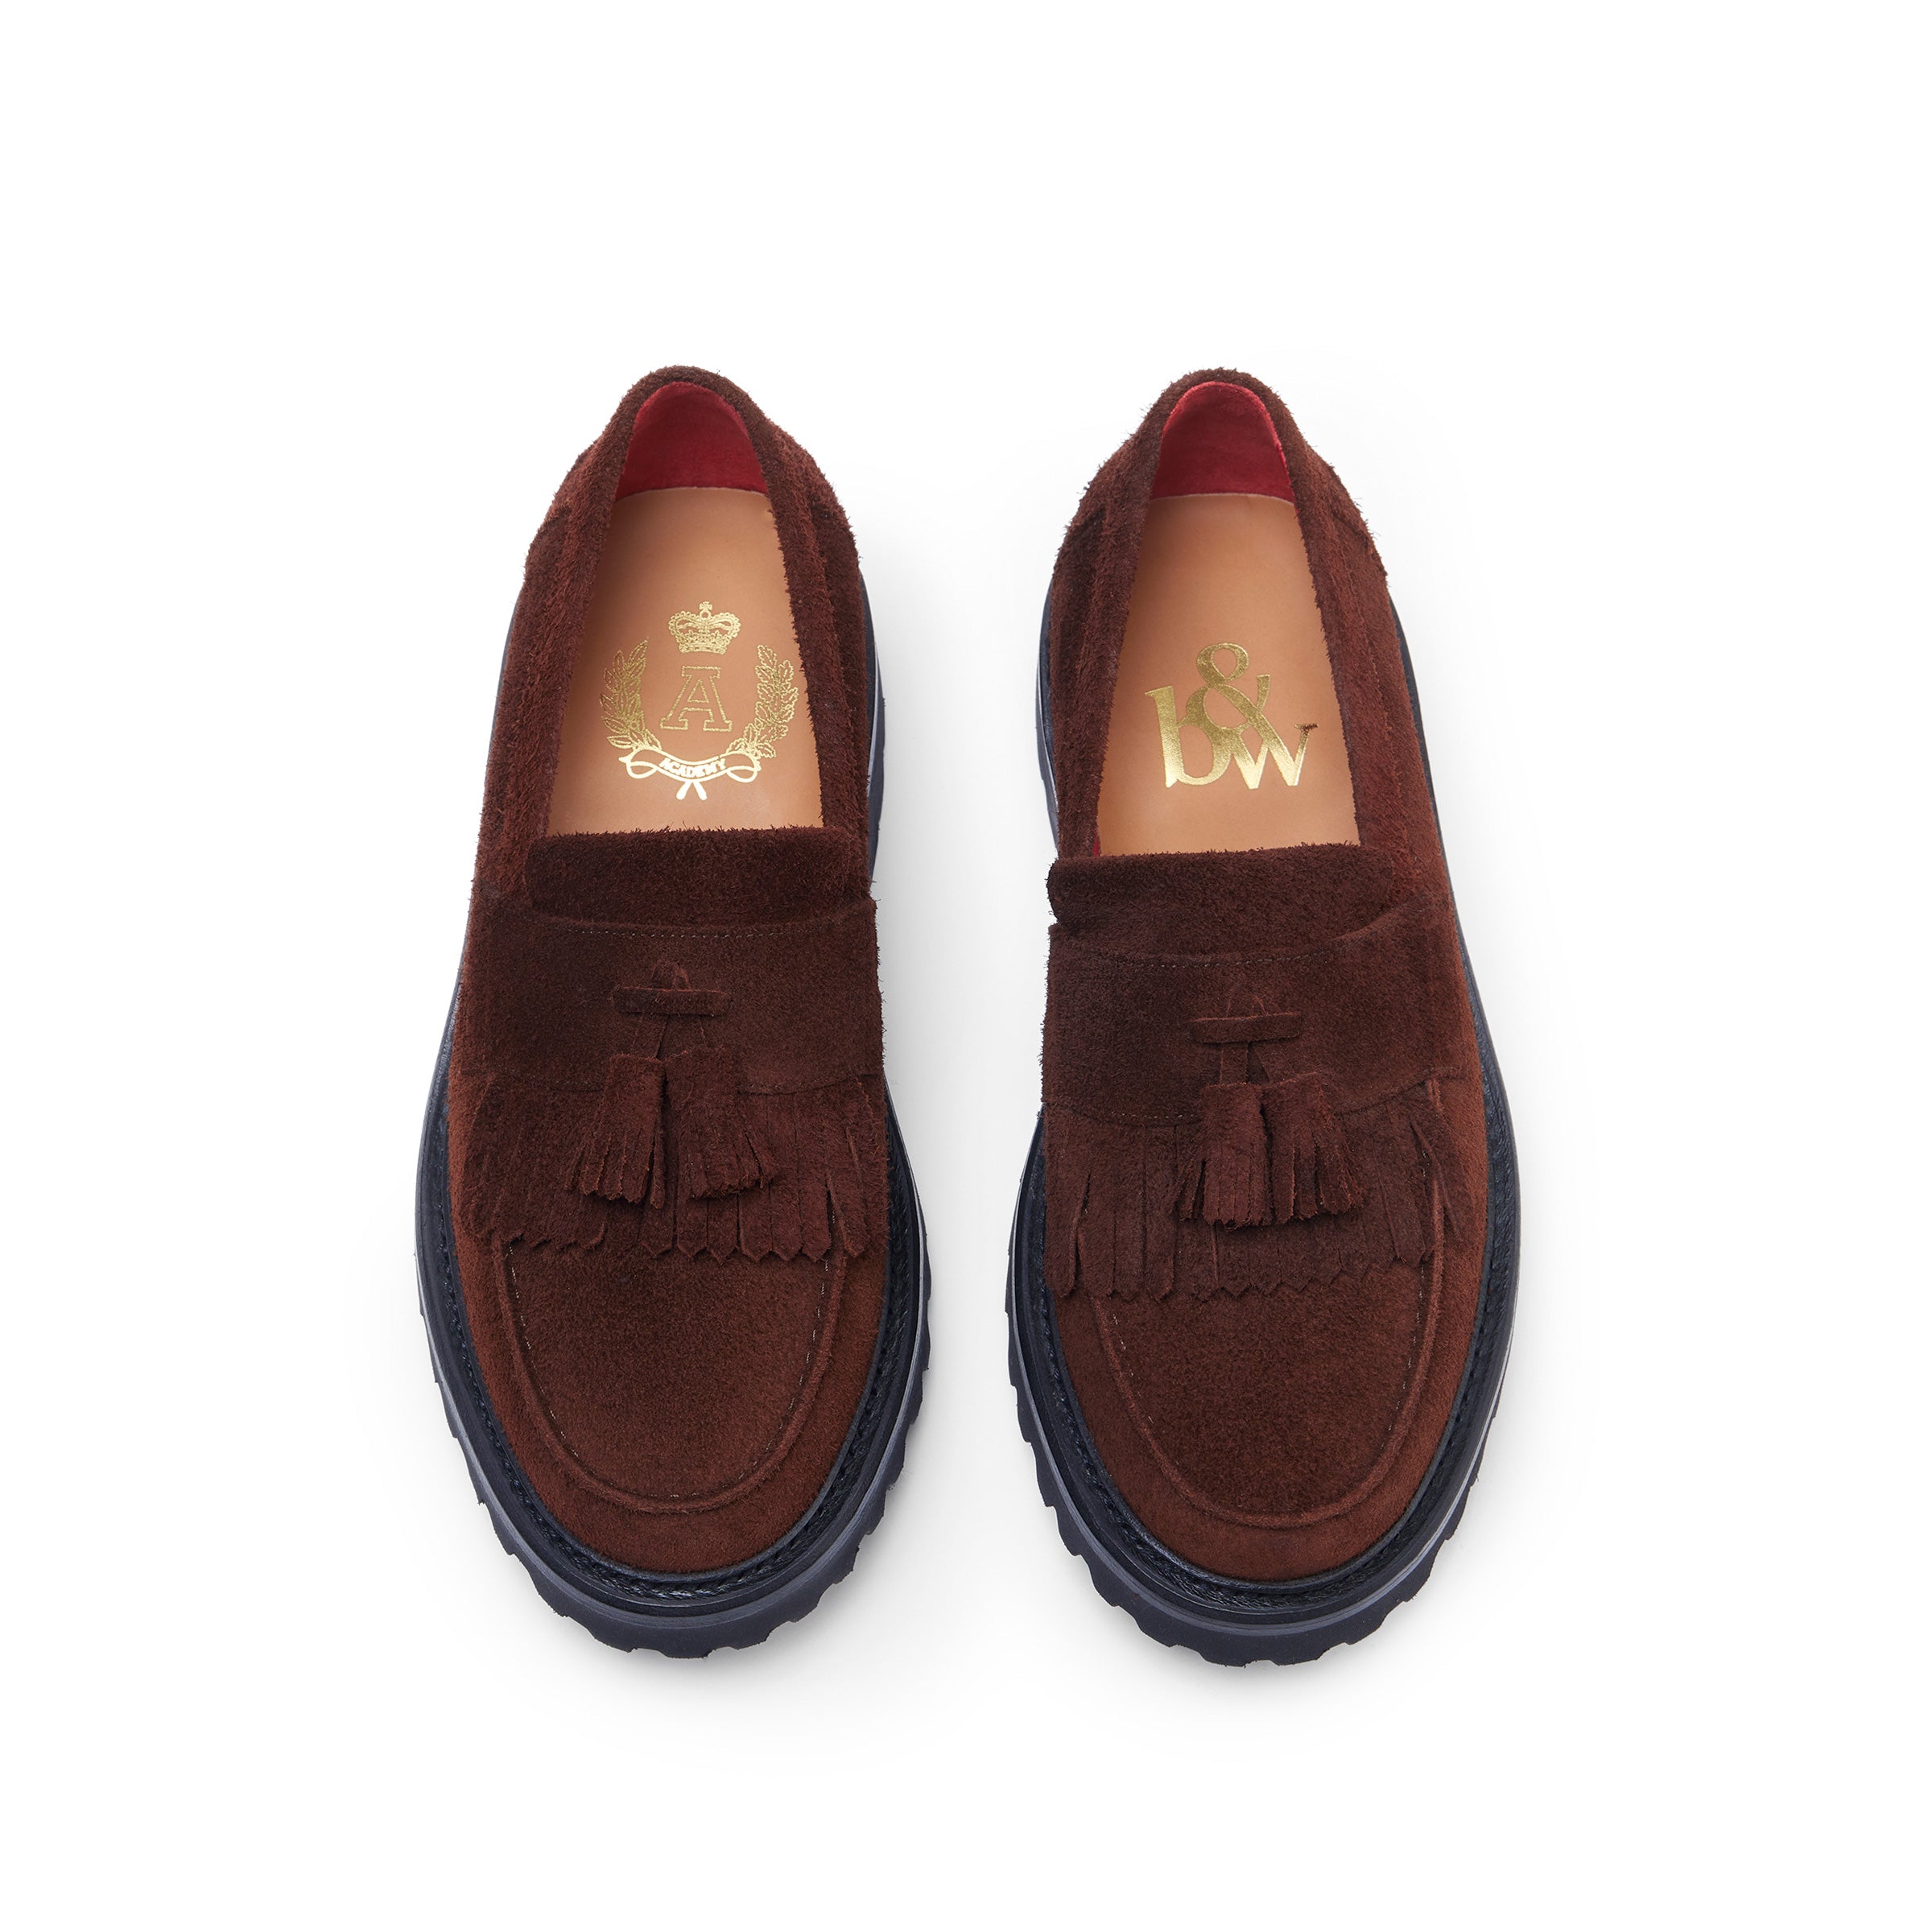 The Kiltie Loafer Exclusively for Academy, Chestnut